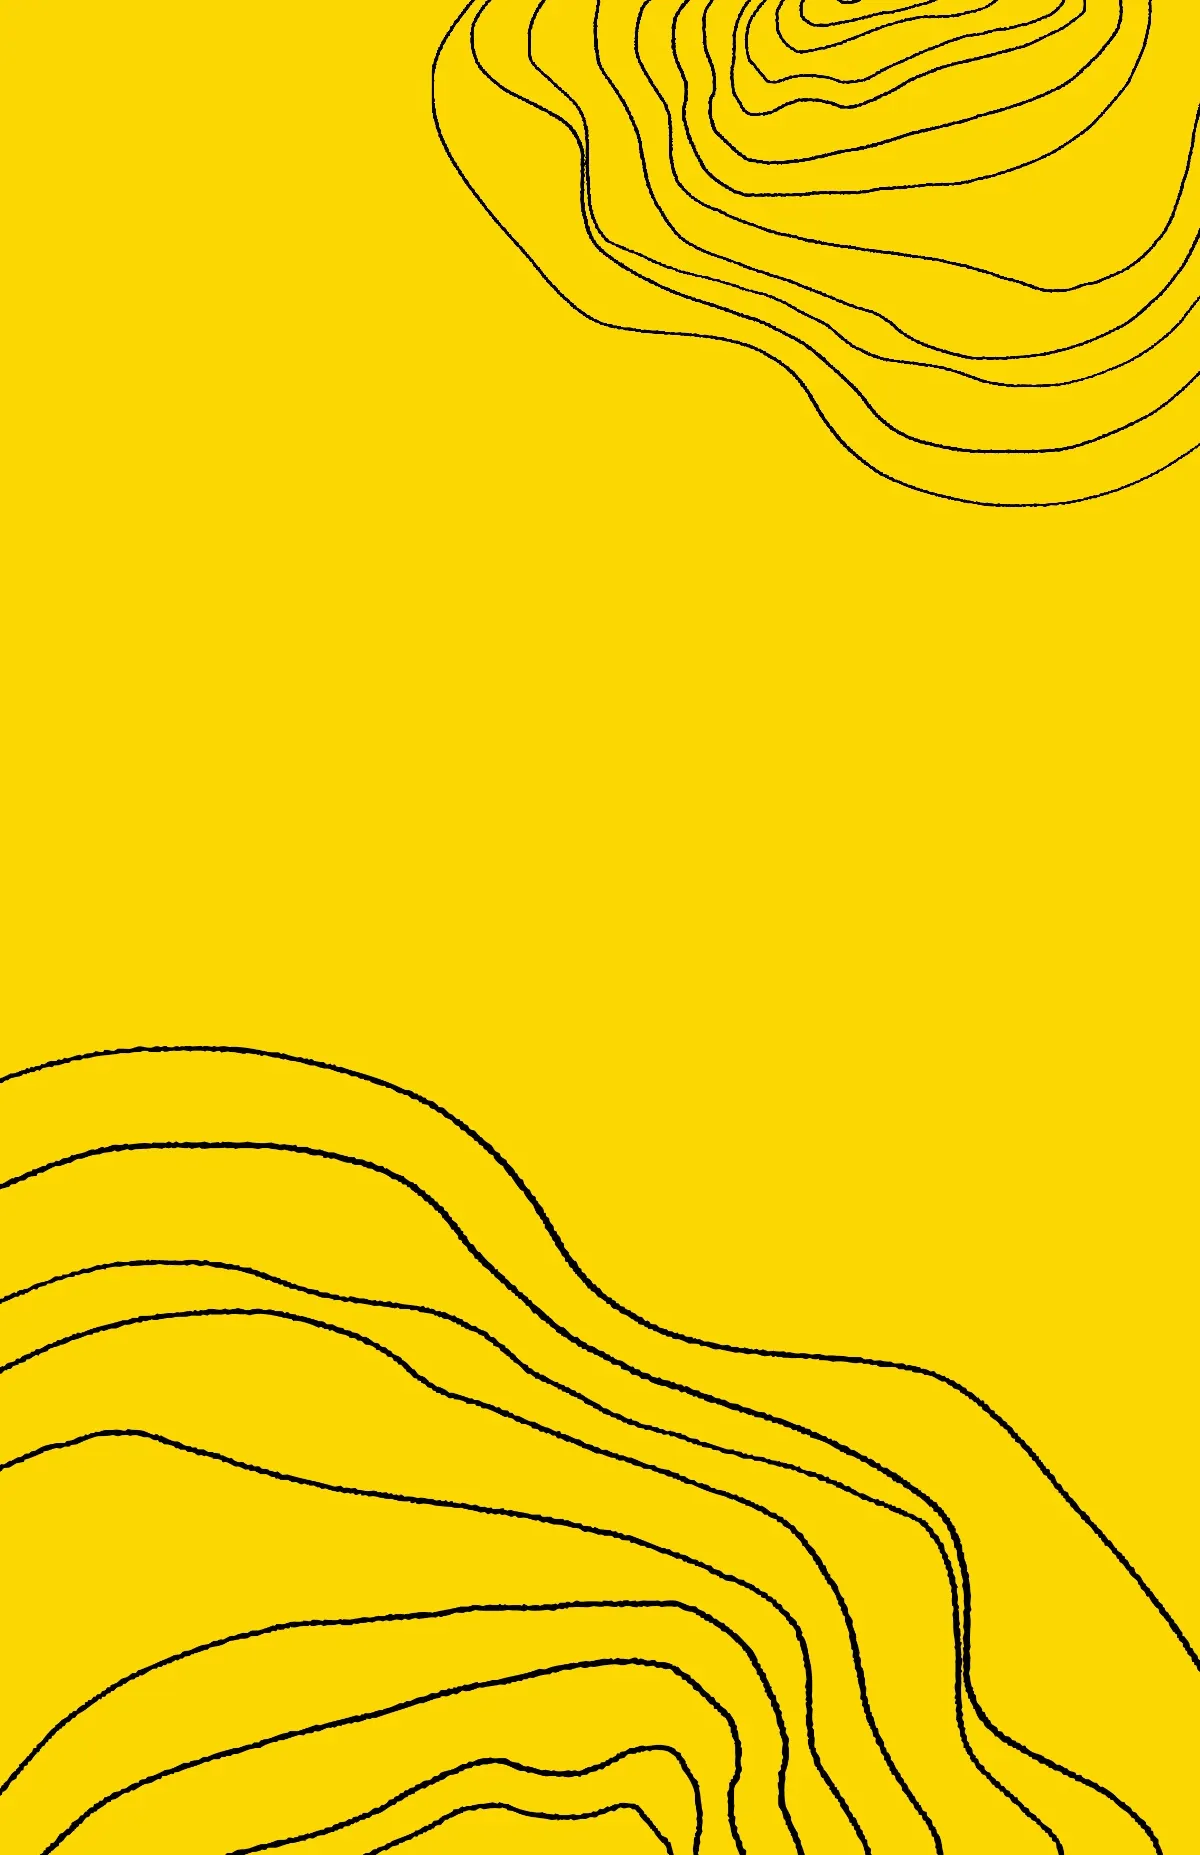 yellow organic doodle poster background